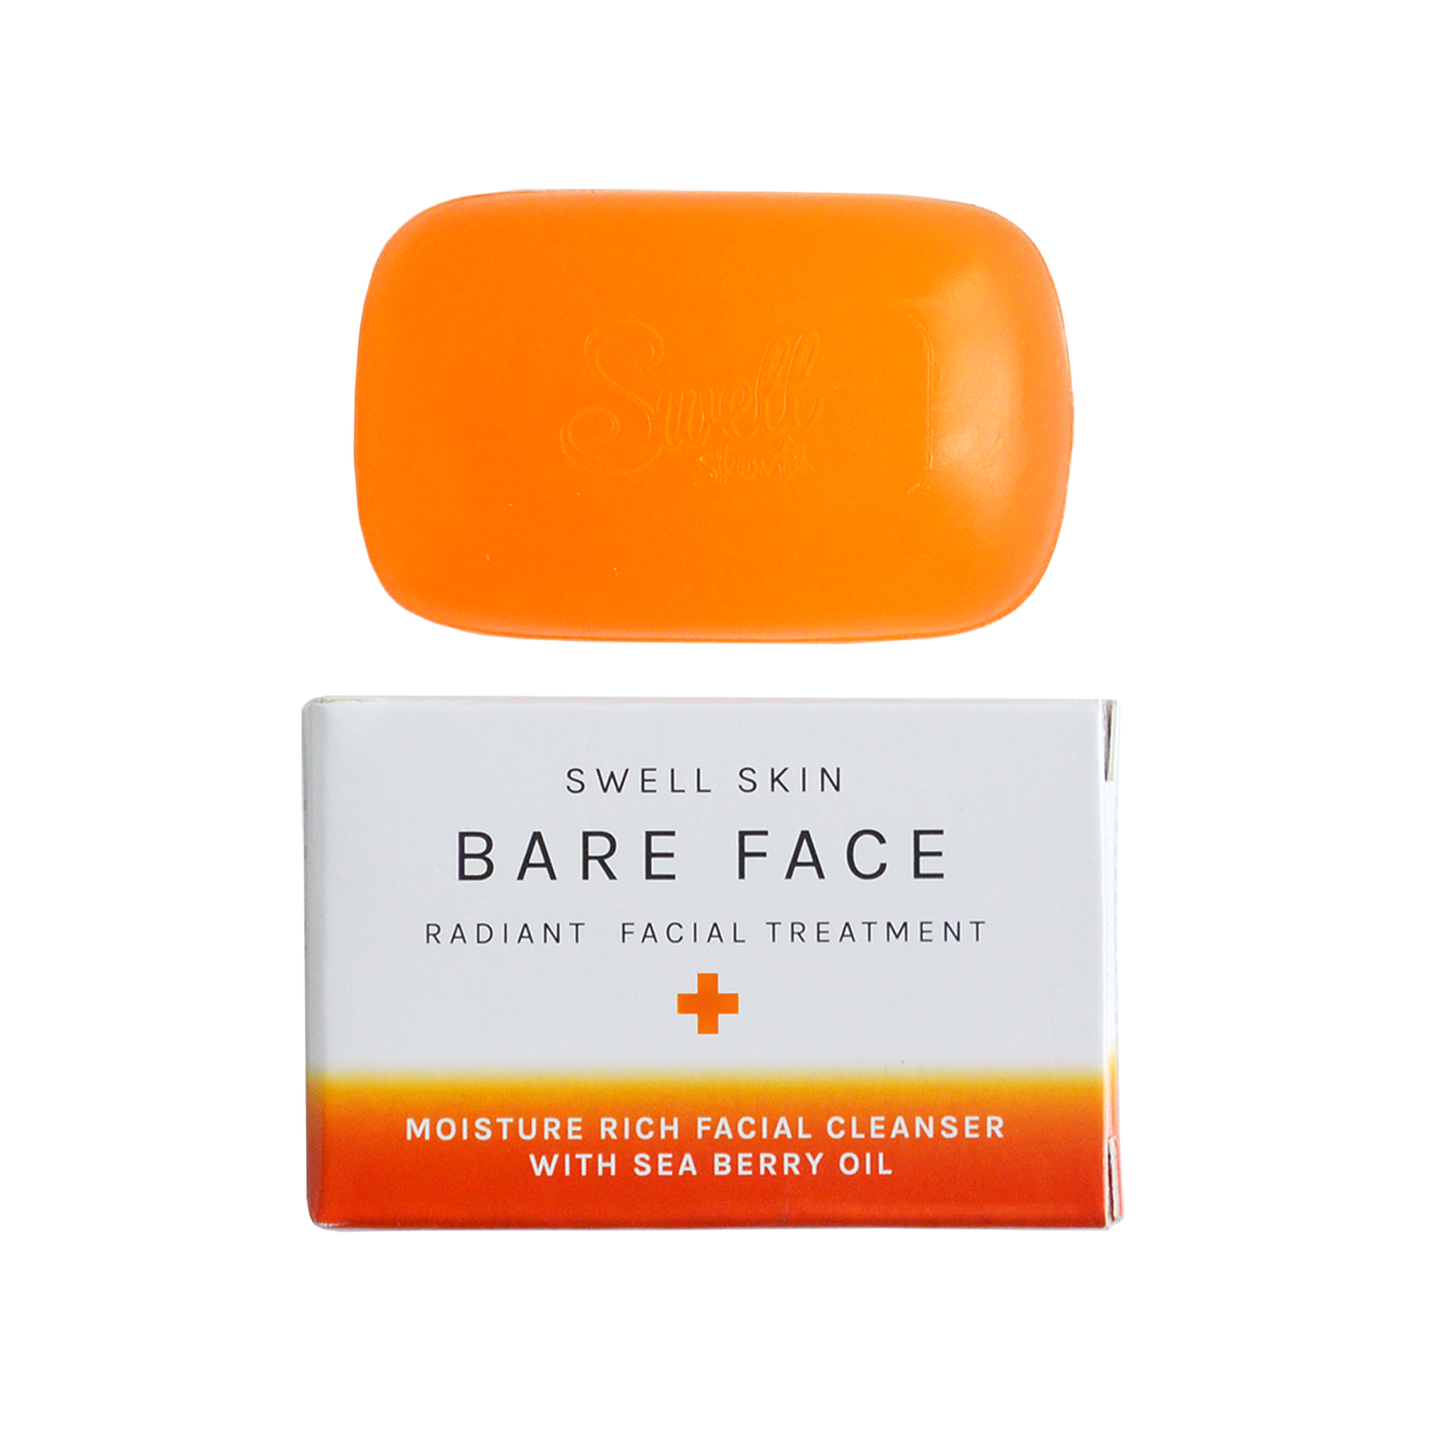 The Bare Face Kit